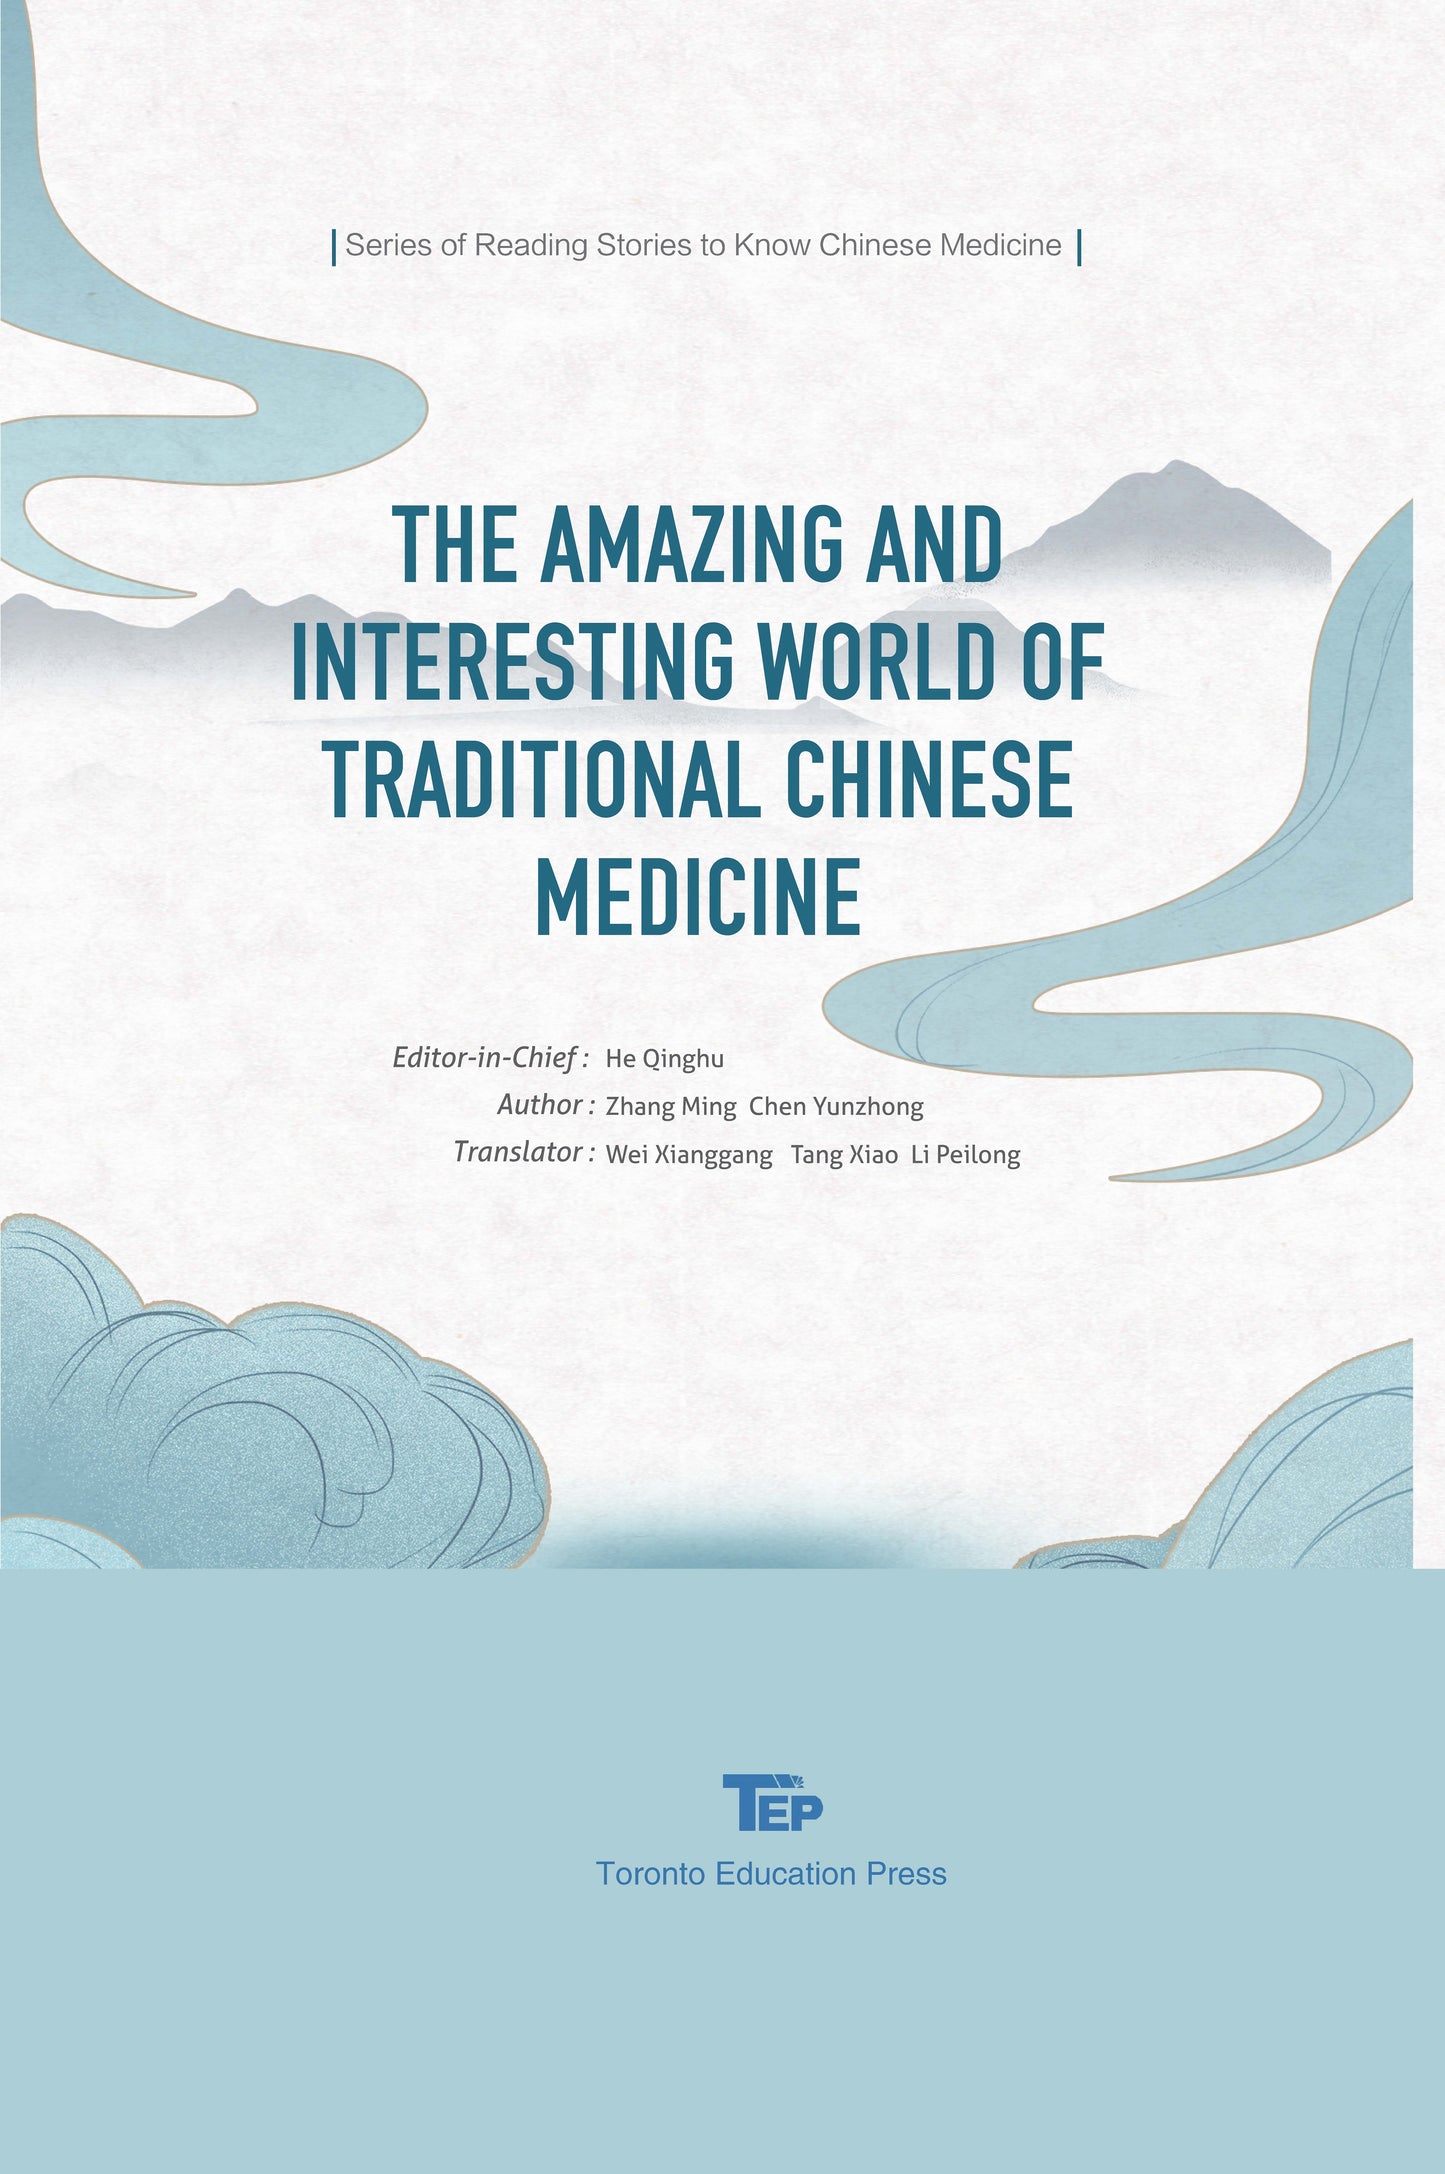 THE AMAZING AND INTERESTING WORLD OF TRADITIONAL CHINESE MEDICINE